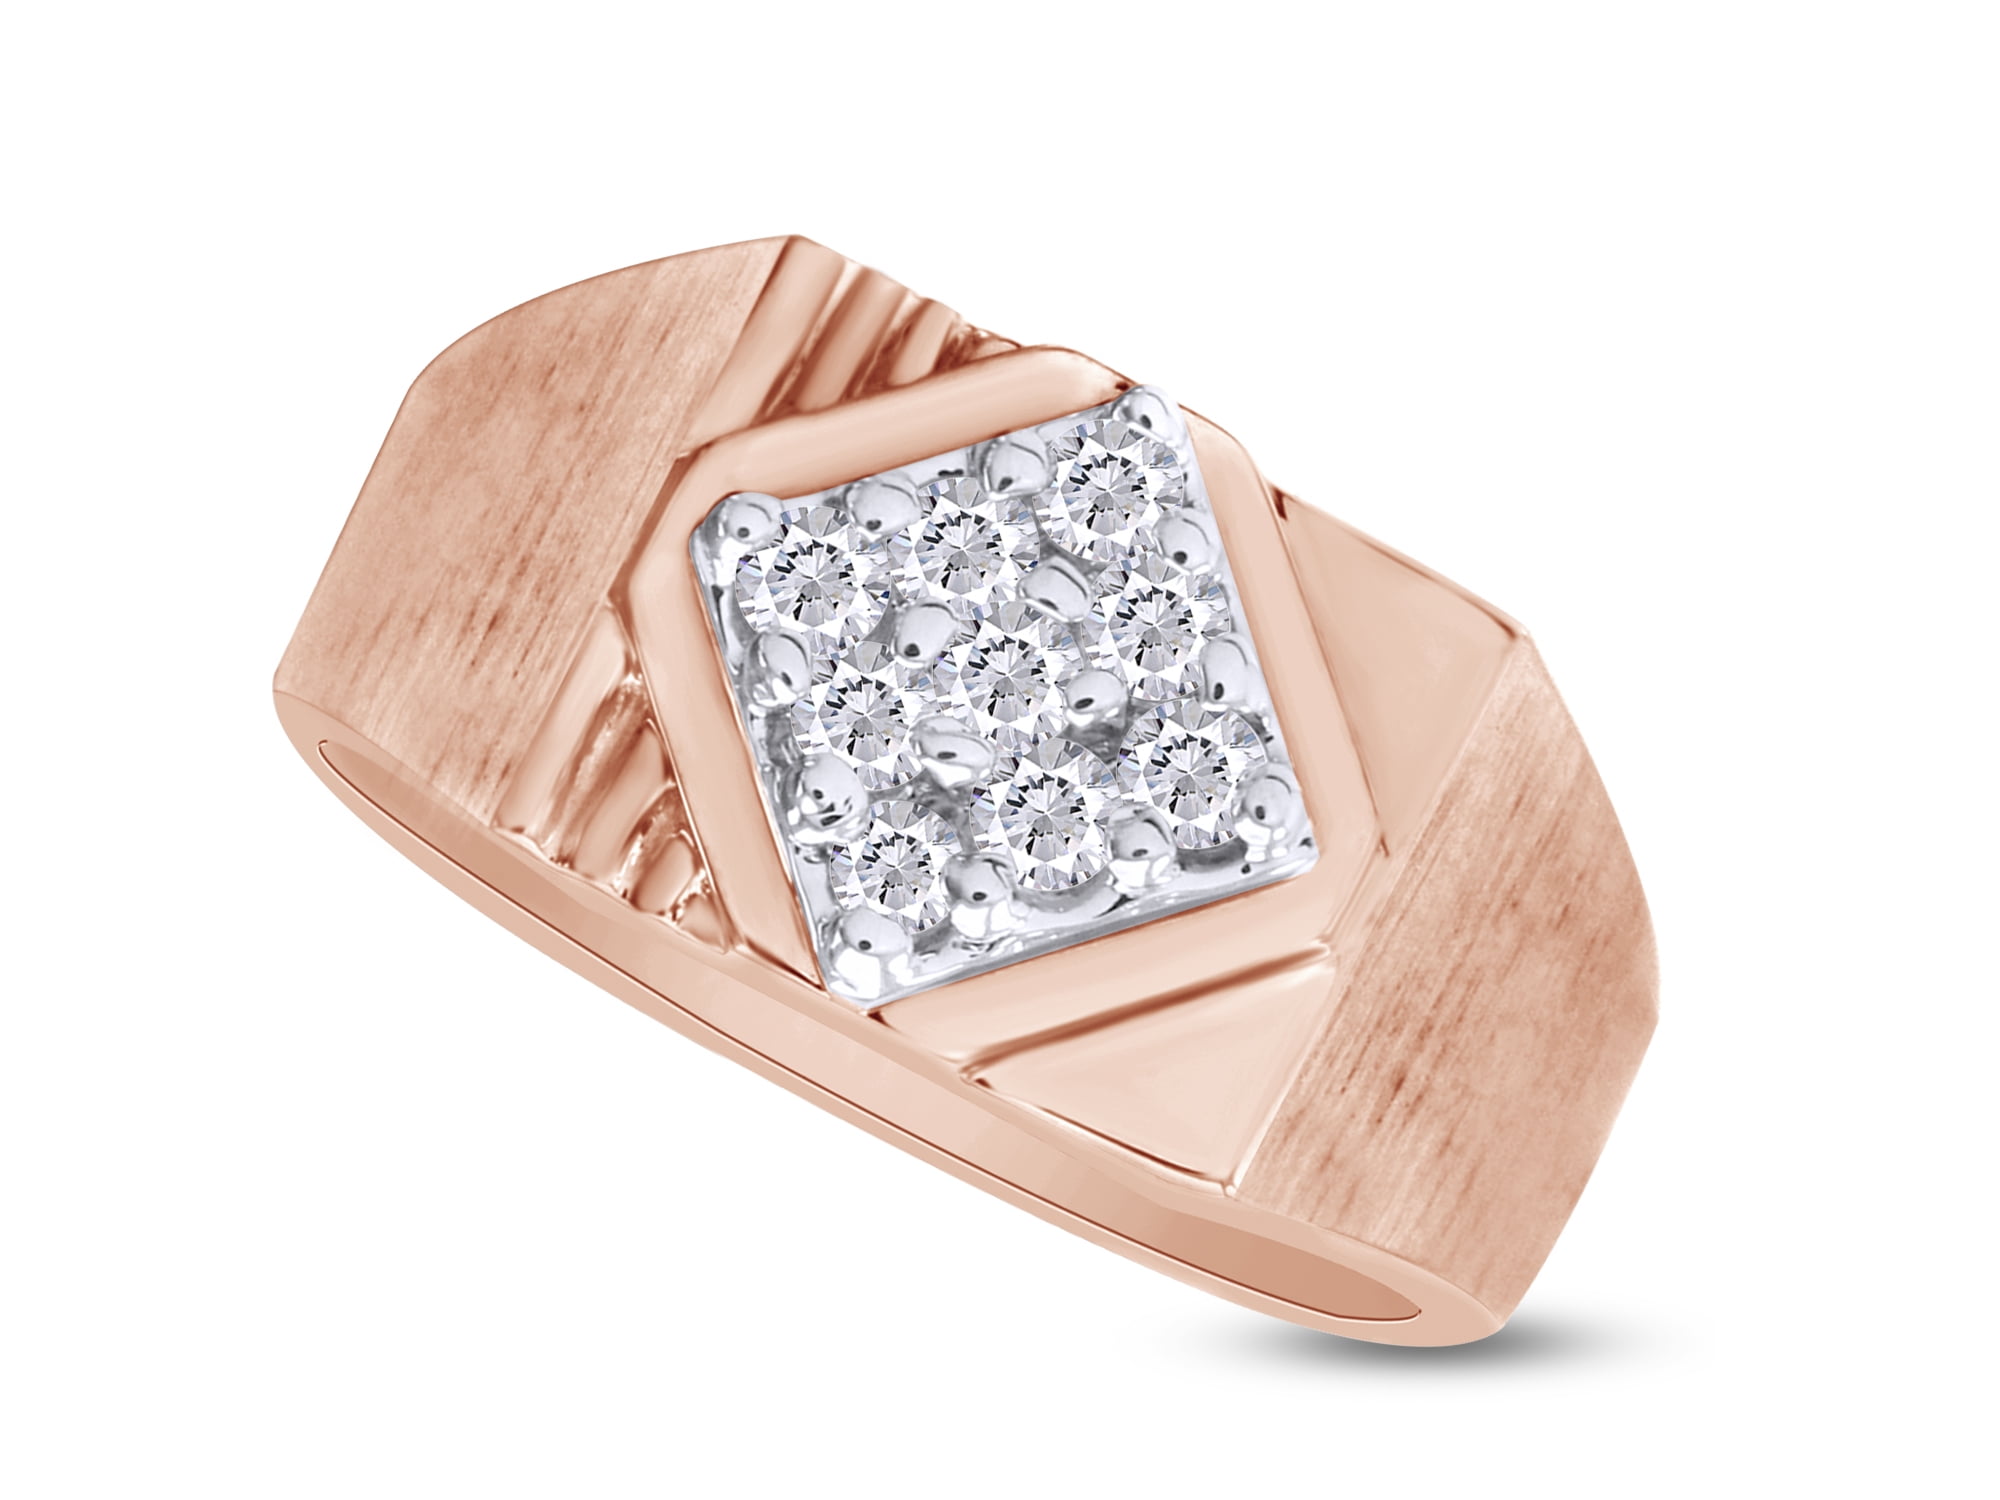 Wishrocks Round Cut White Cubic Zirconia Cluster Ring in 14K White Gold Over Sterling Silver